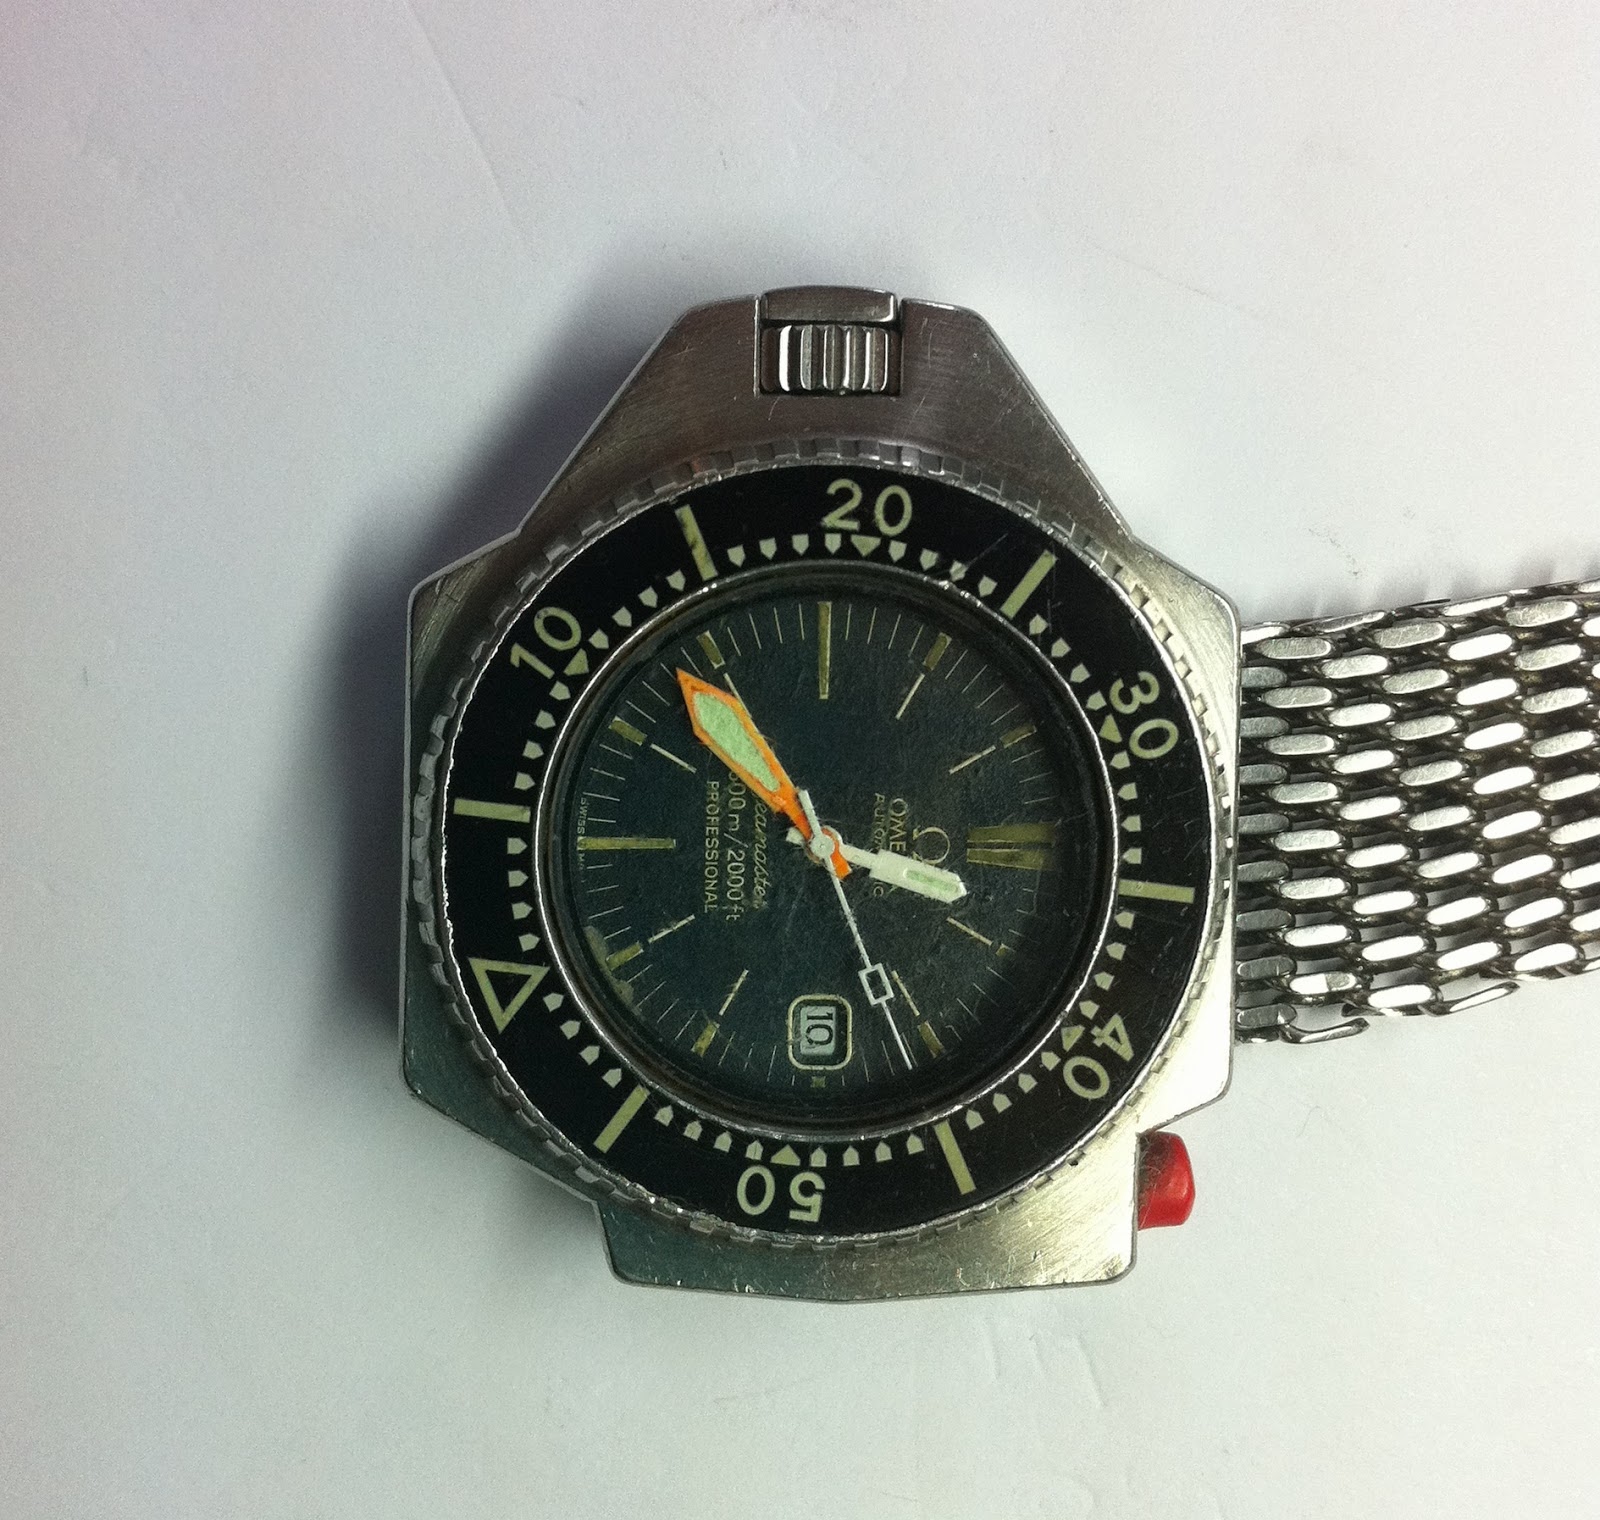 ... are looking for old vintage Omega Mens Watches Regardless of Condition